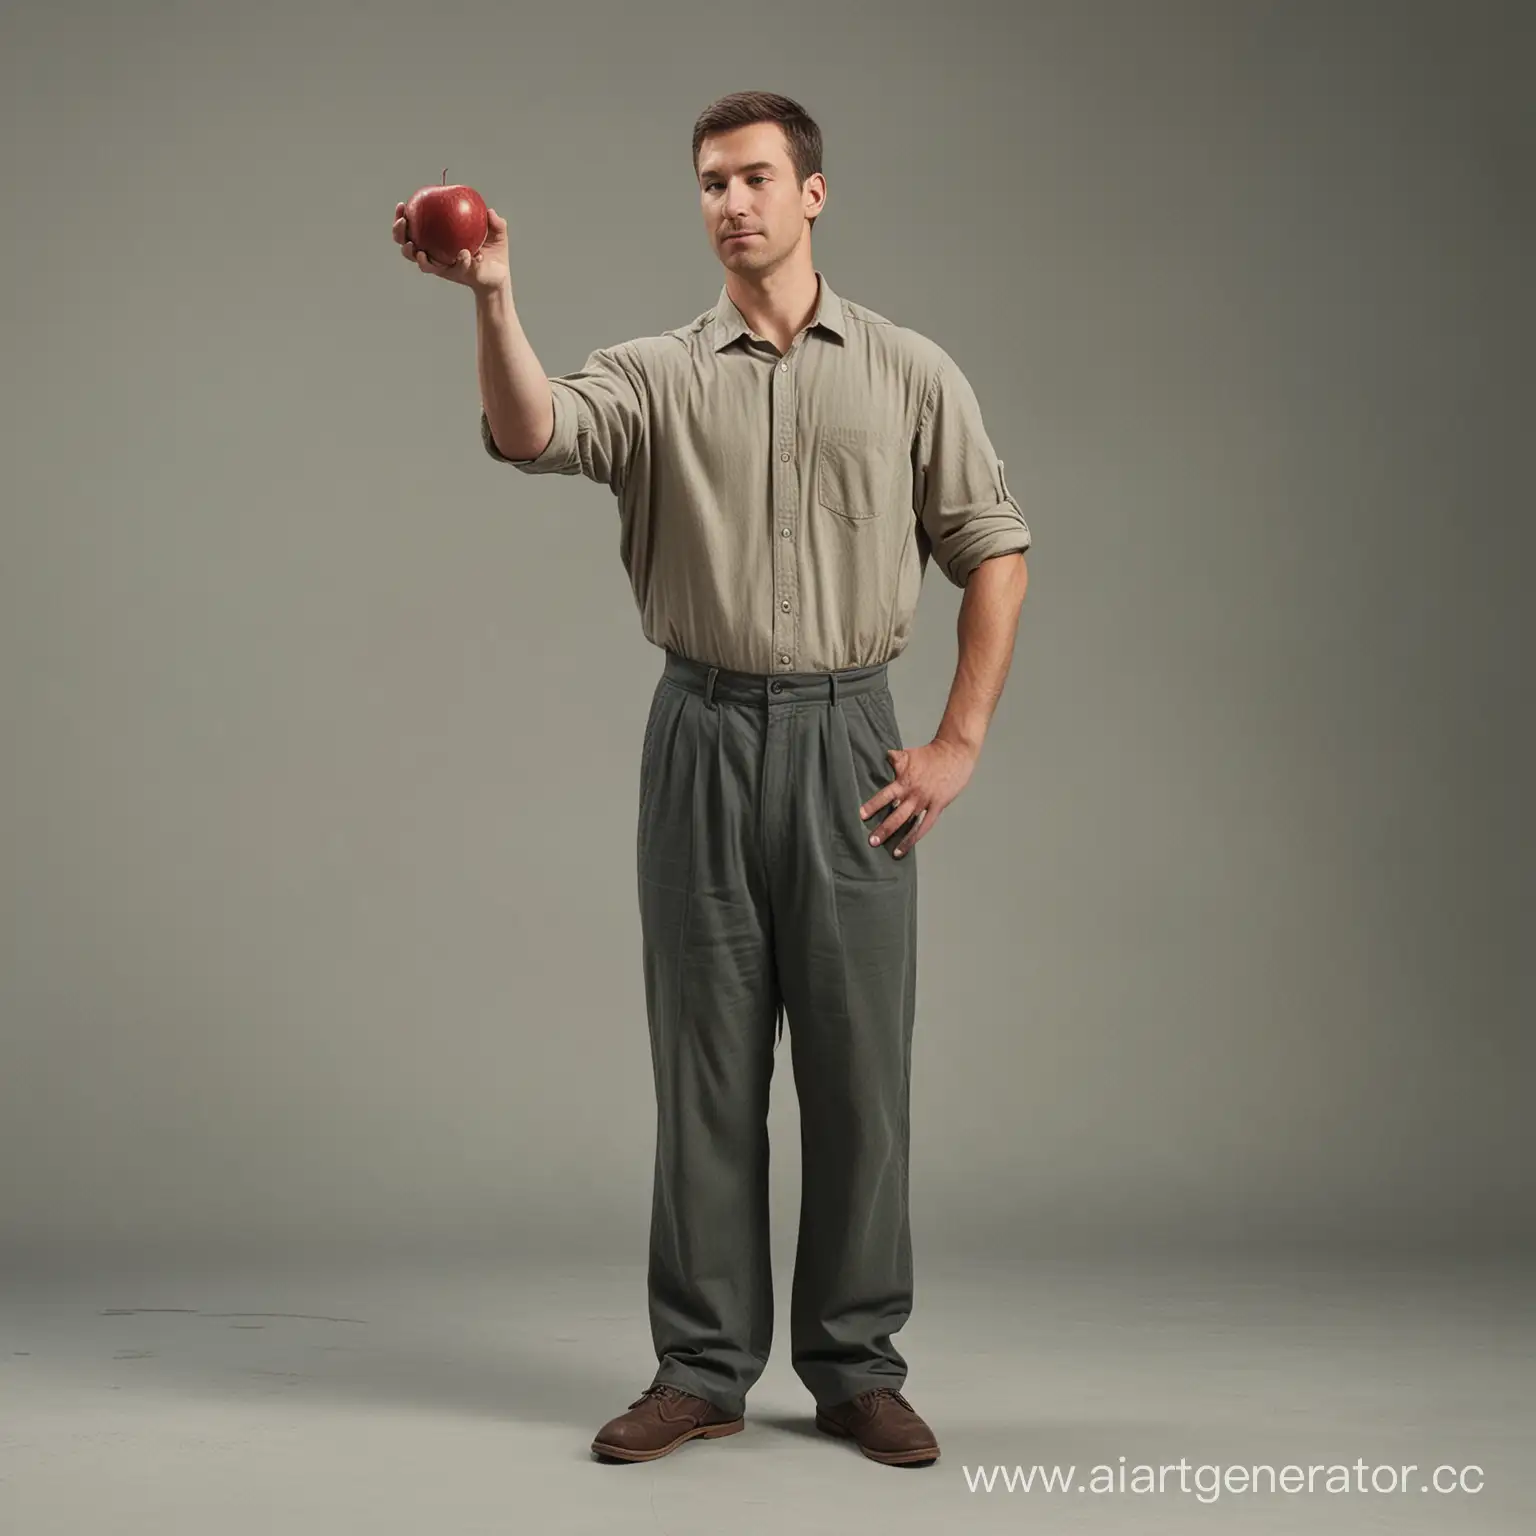 Man-Holding-Staff-and-Apple